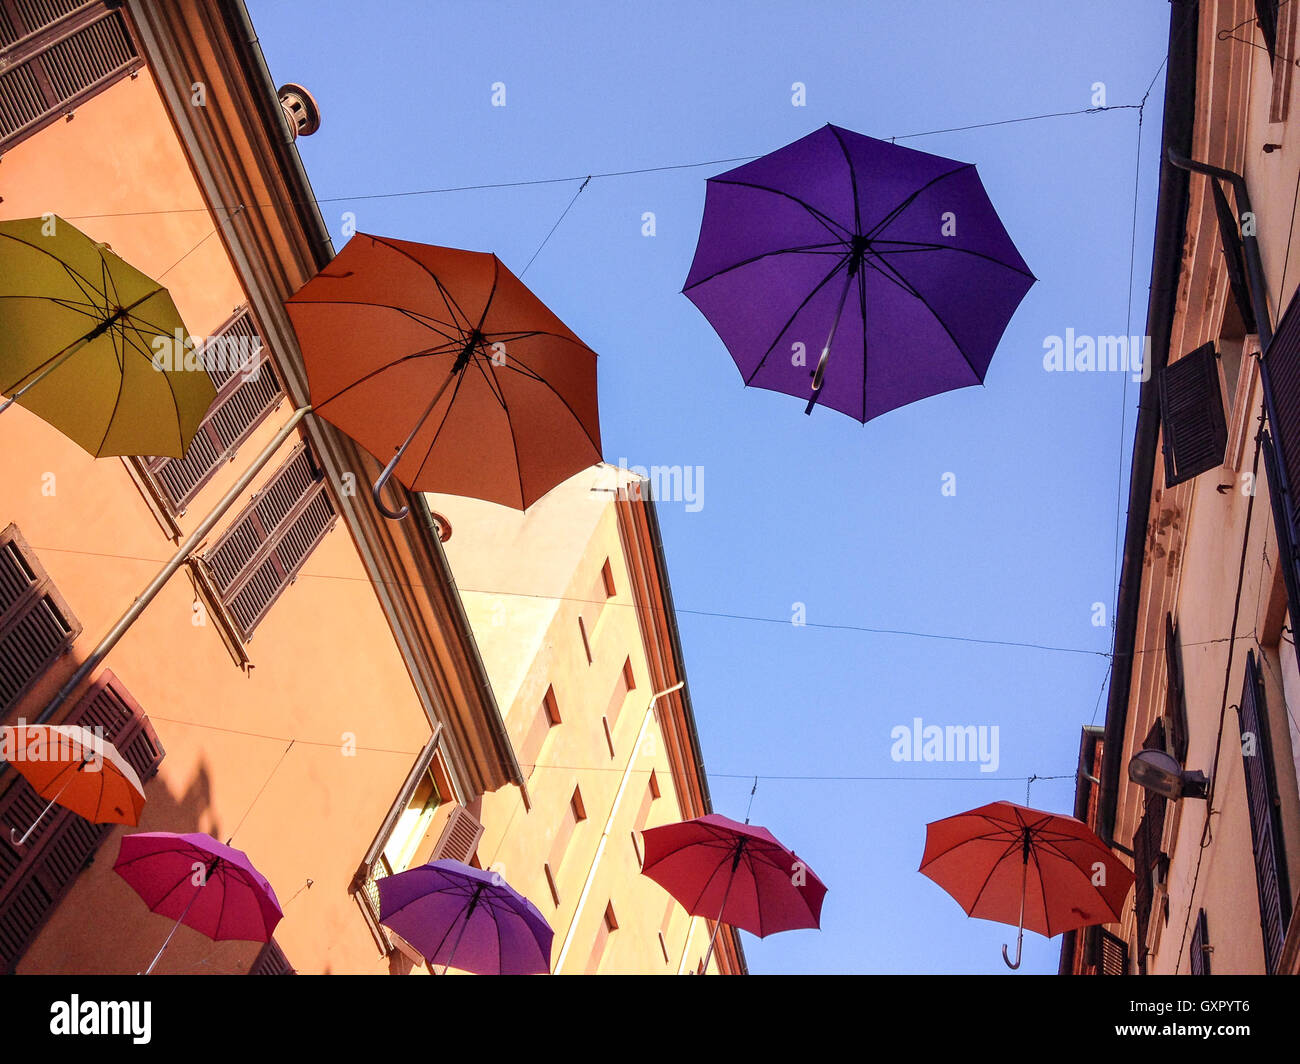 Colorful umbrellas floating in the air Stock Photo